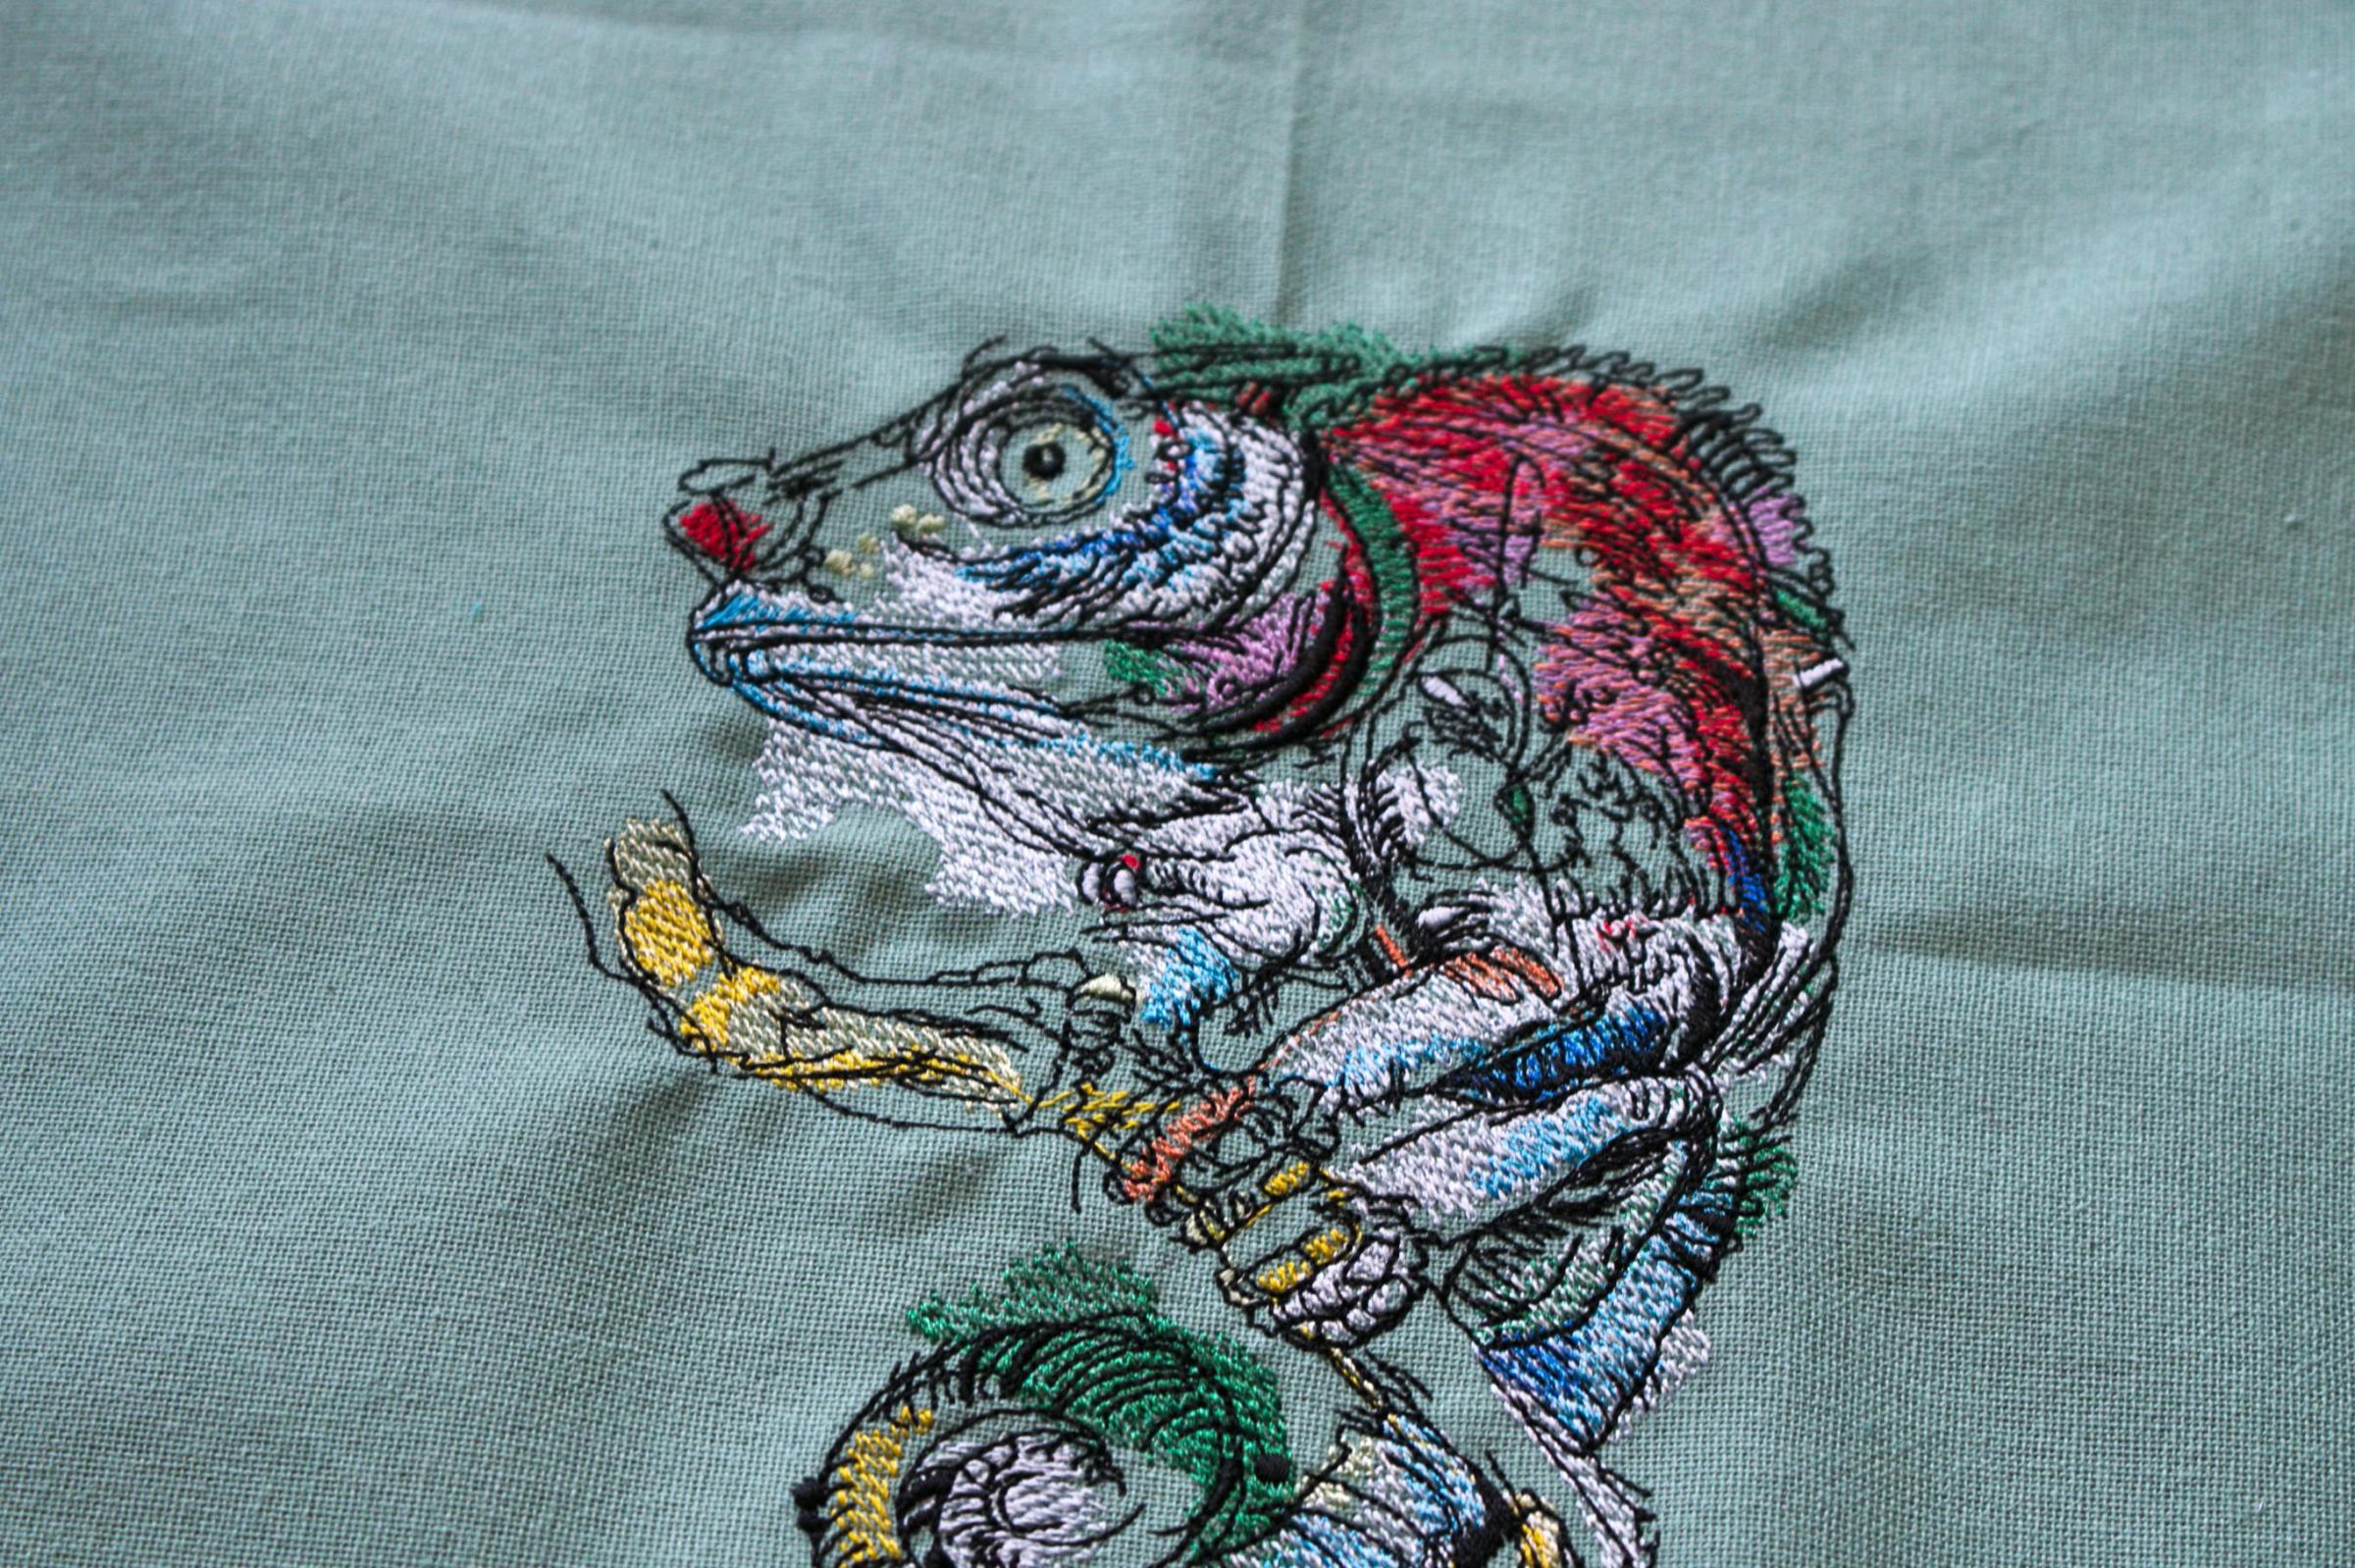 Lizard on tree branch embroidery design